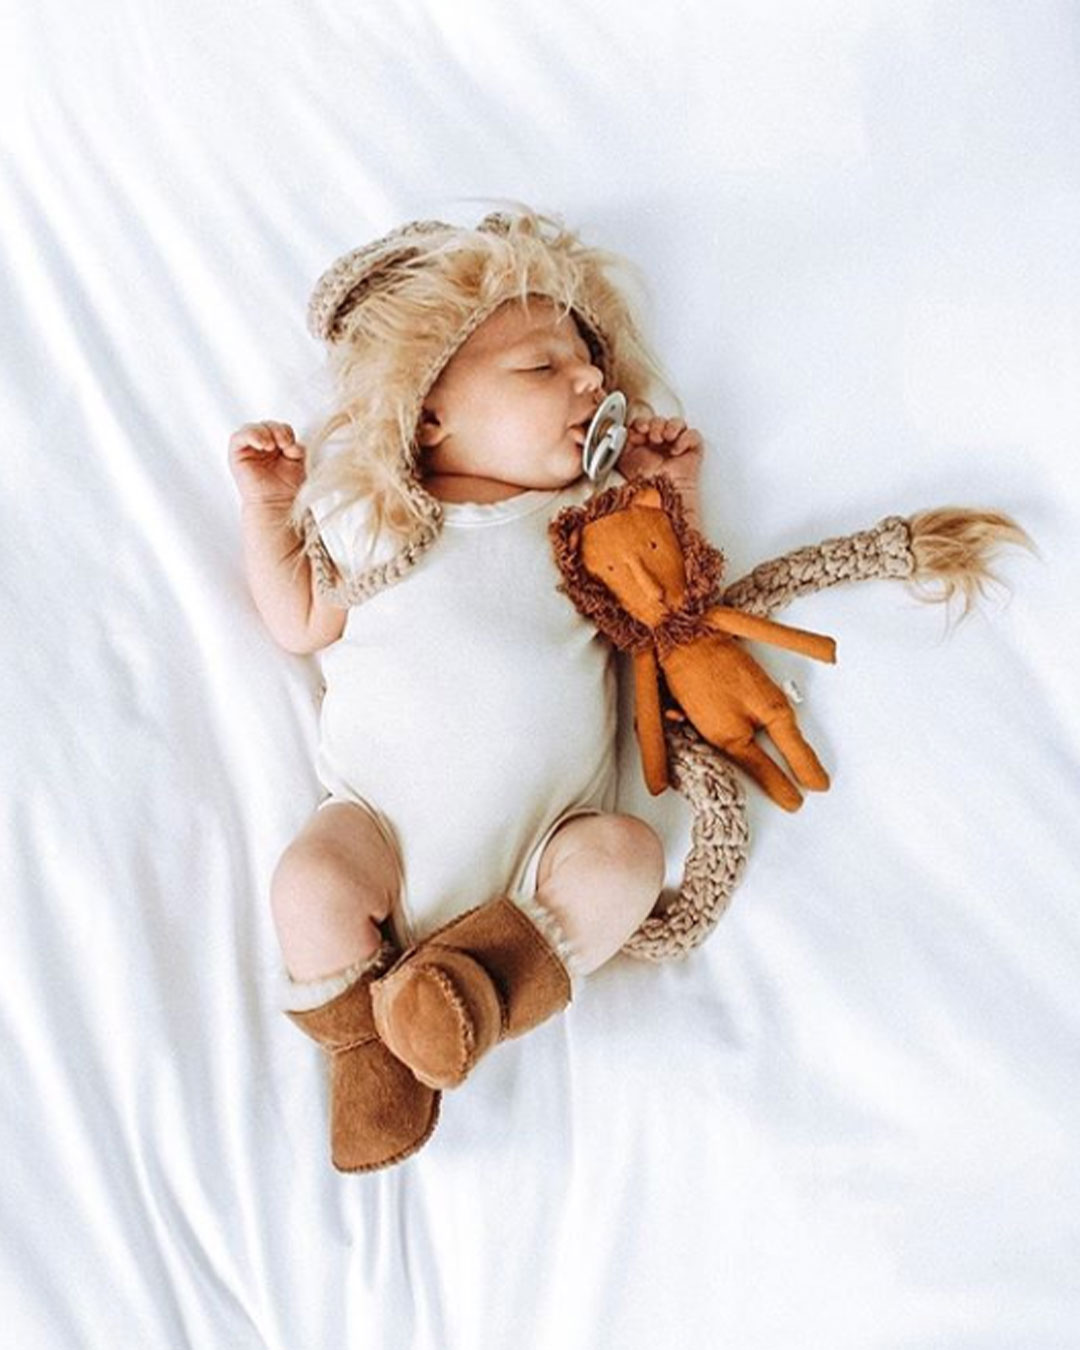 Baby laying on bed with stuffed toy wearing EMU baby booties